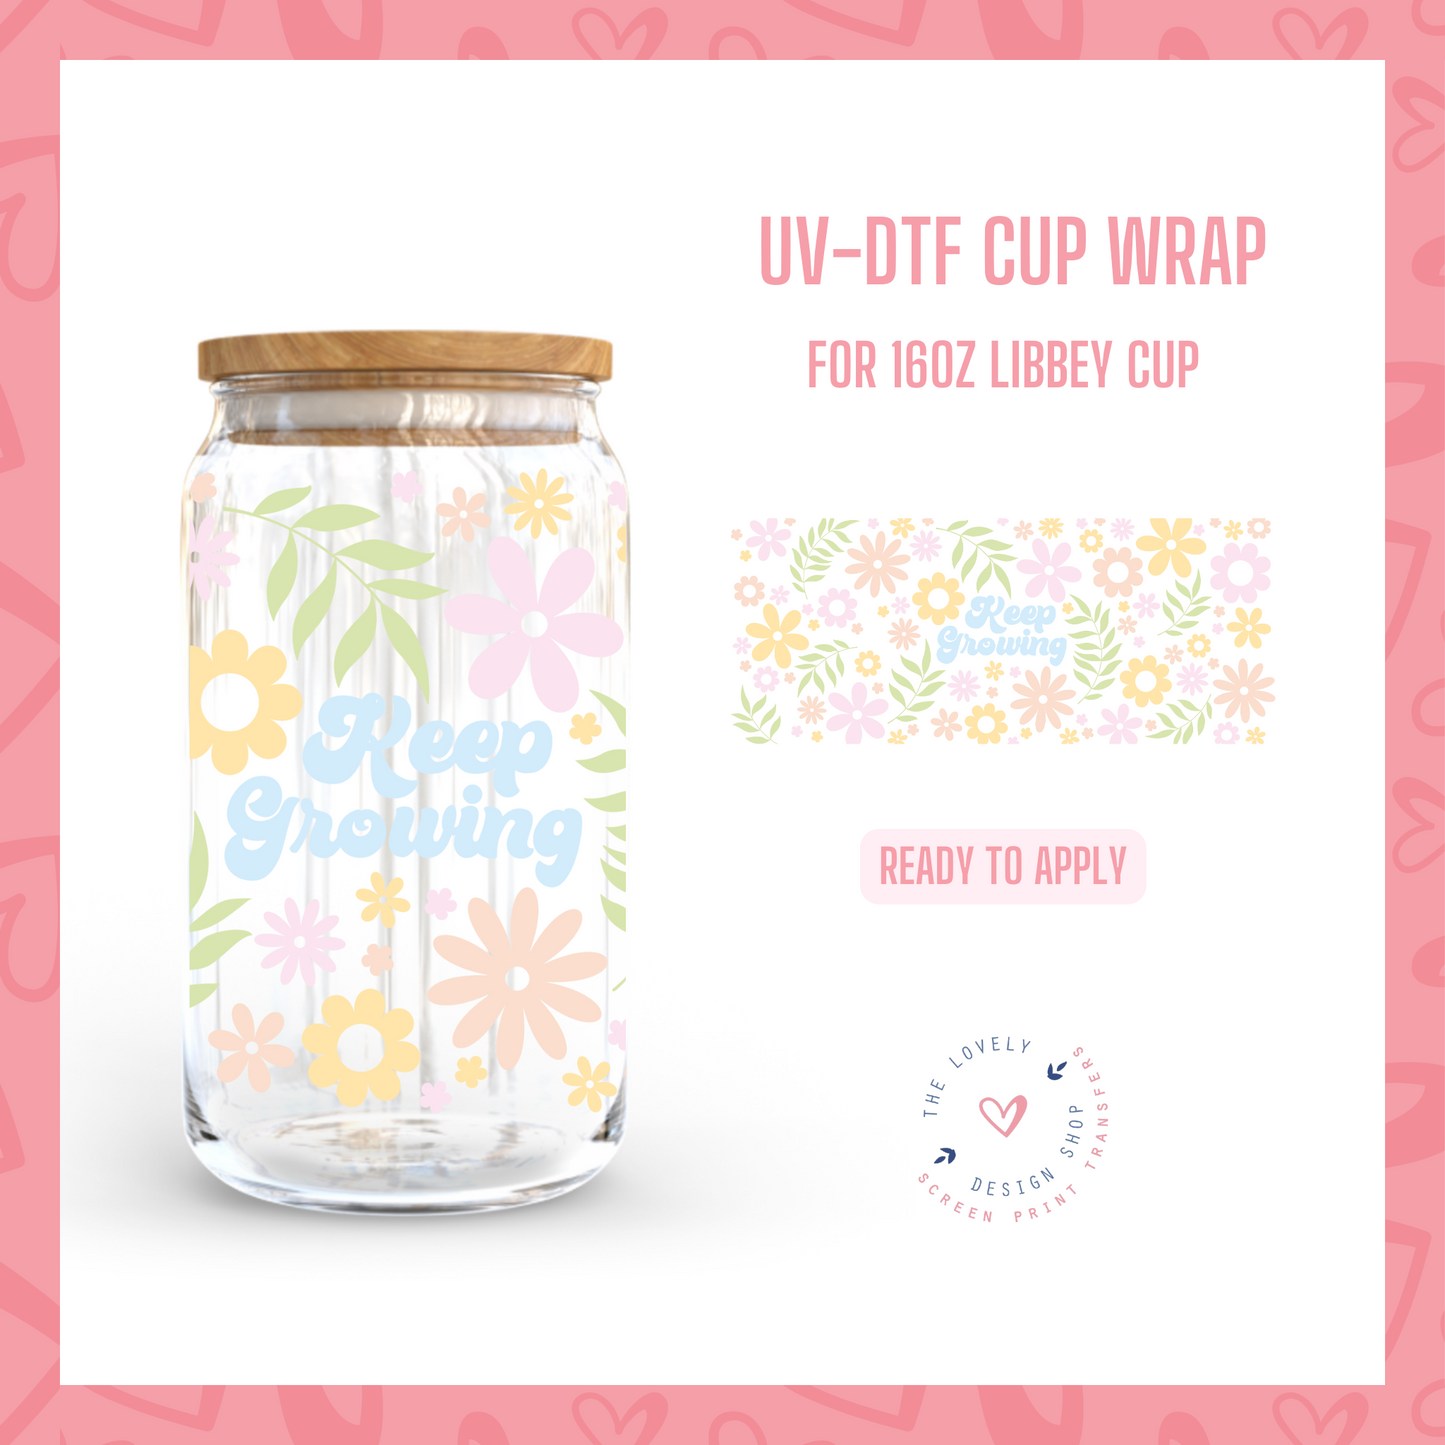 Keep Growing - UV DTF 16 oz Libbey Cup Wrap (Ready to Ship)